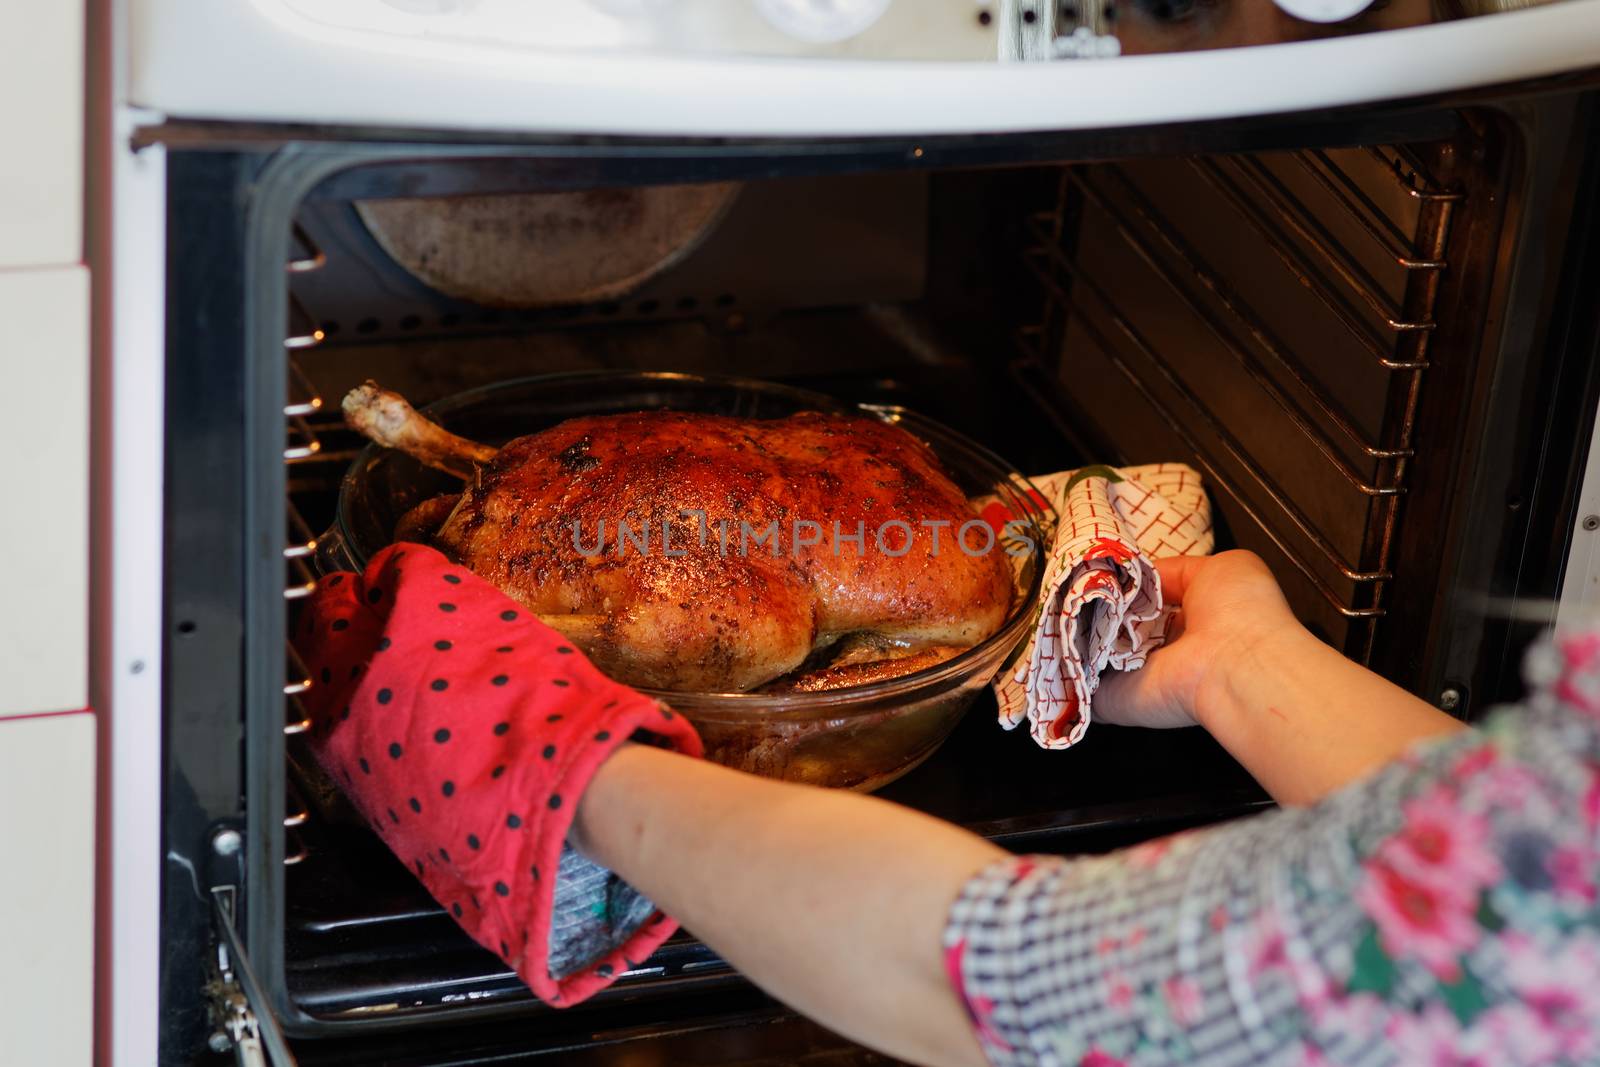 Woman taking out crispy roasted duck in a roasting pan in an oven.